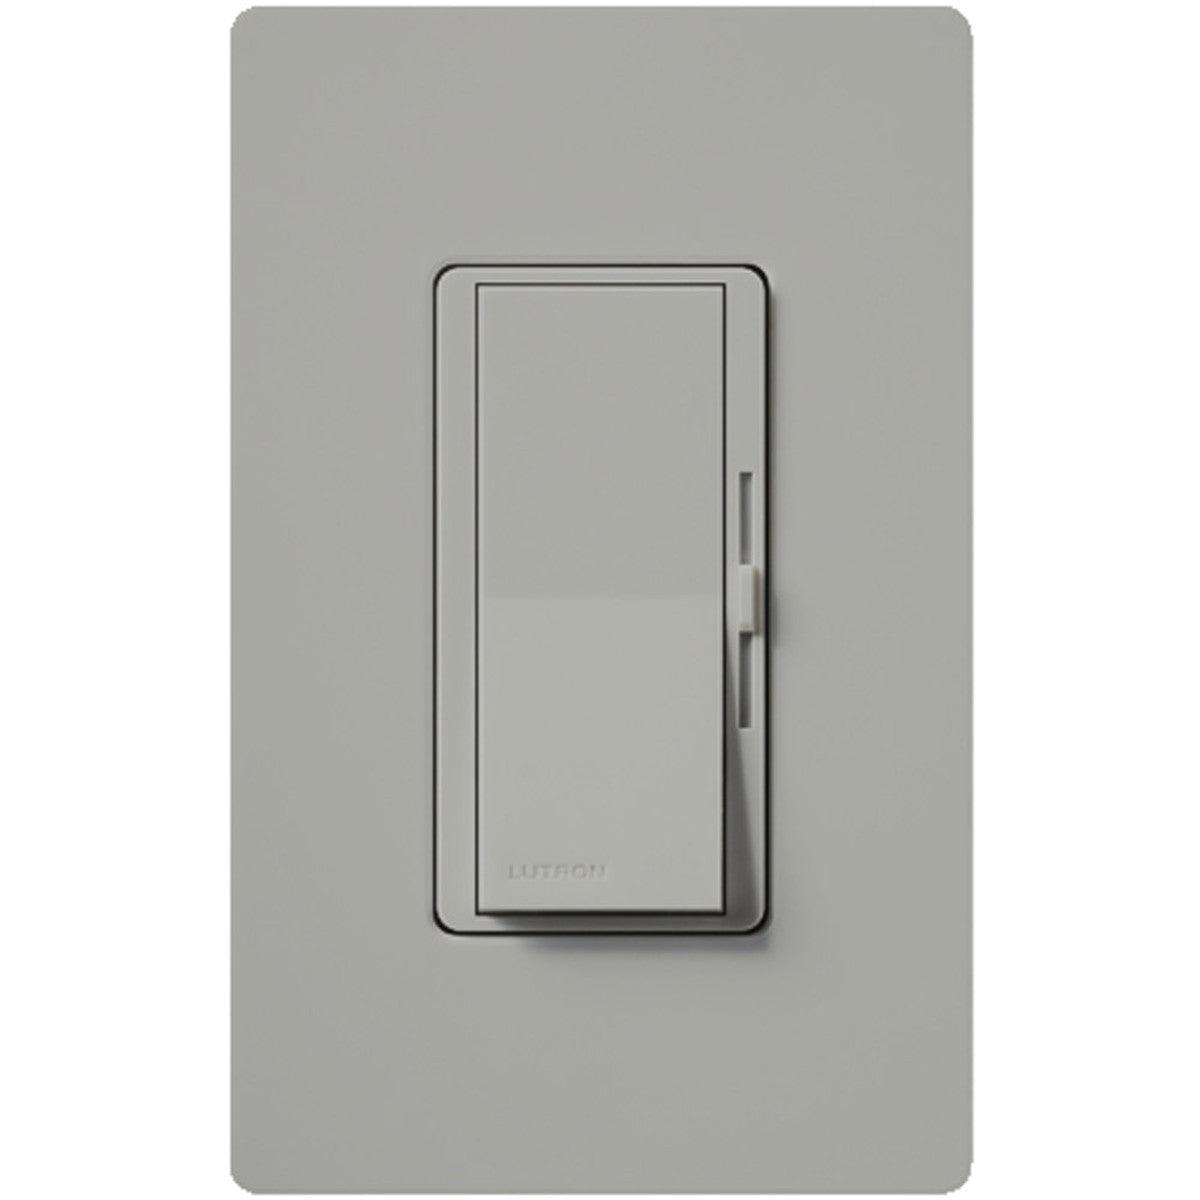 Lutron Diva Dimmer Switches and Light Switches